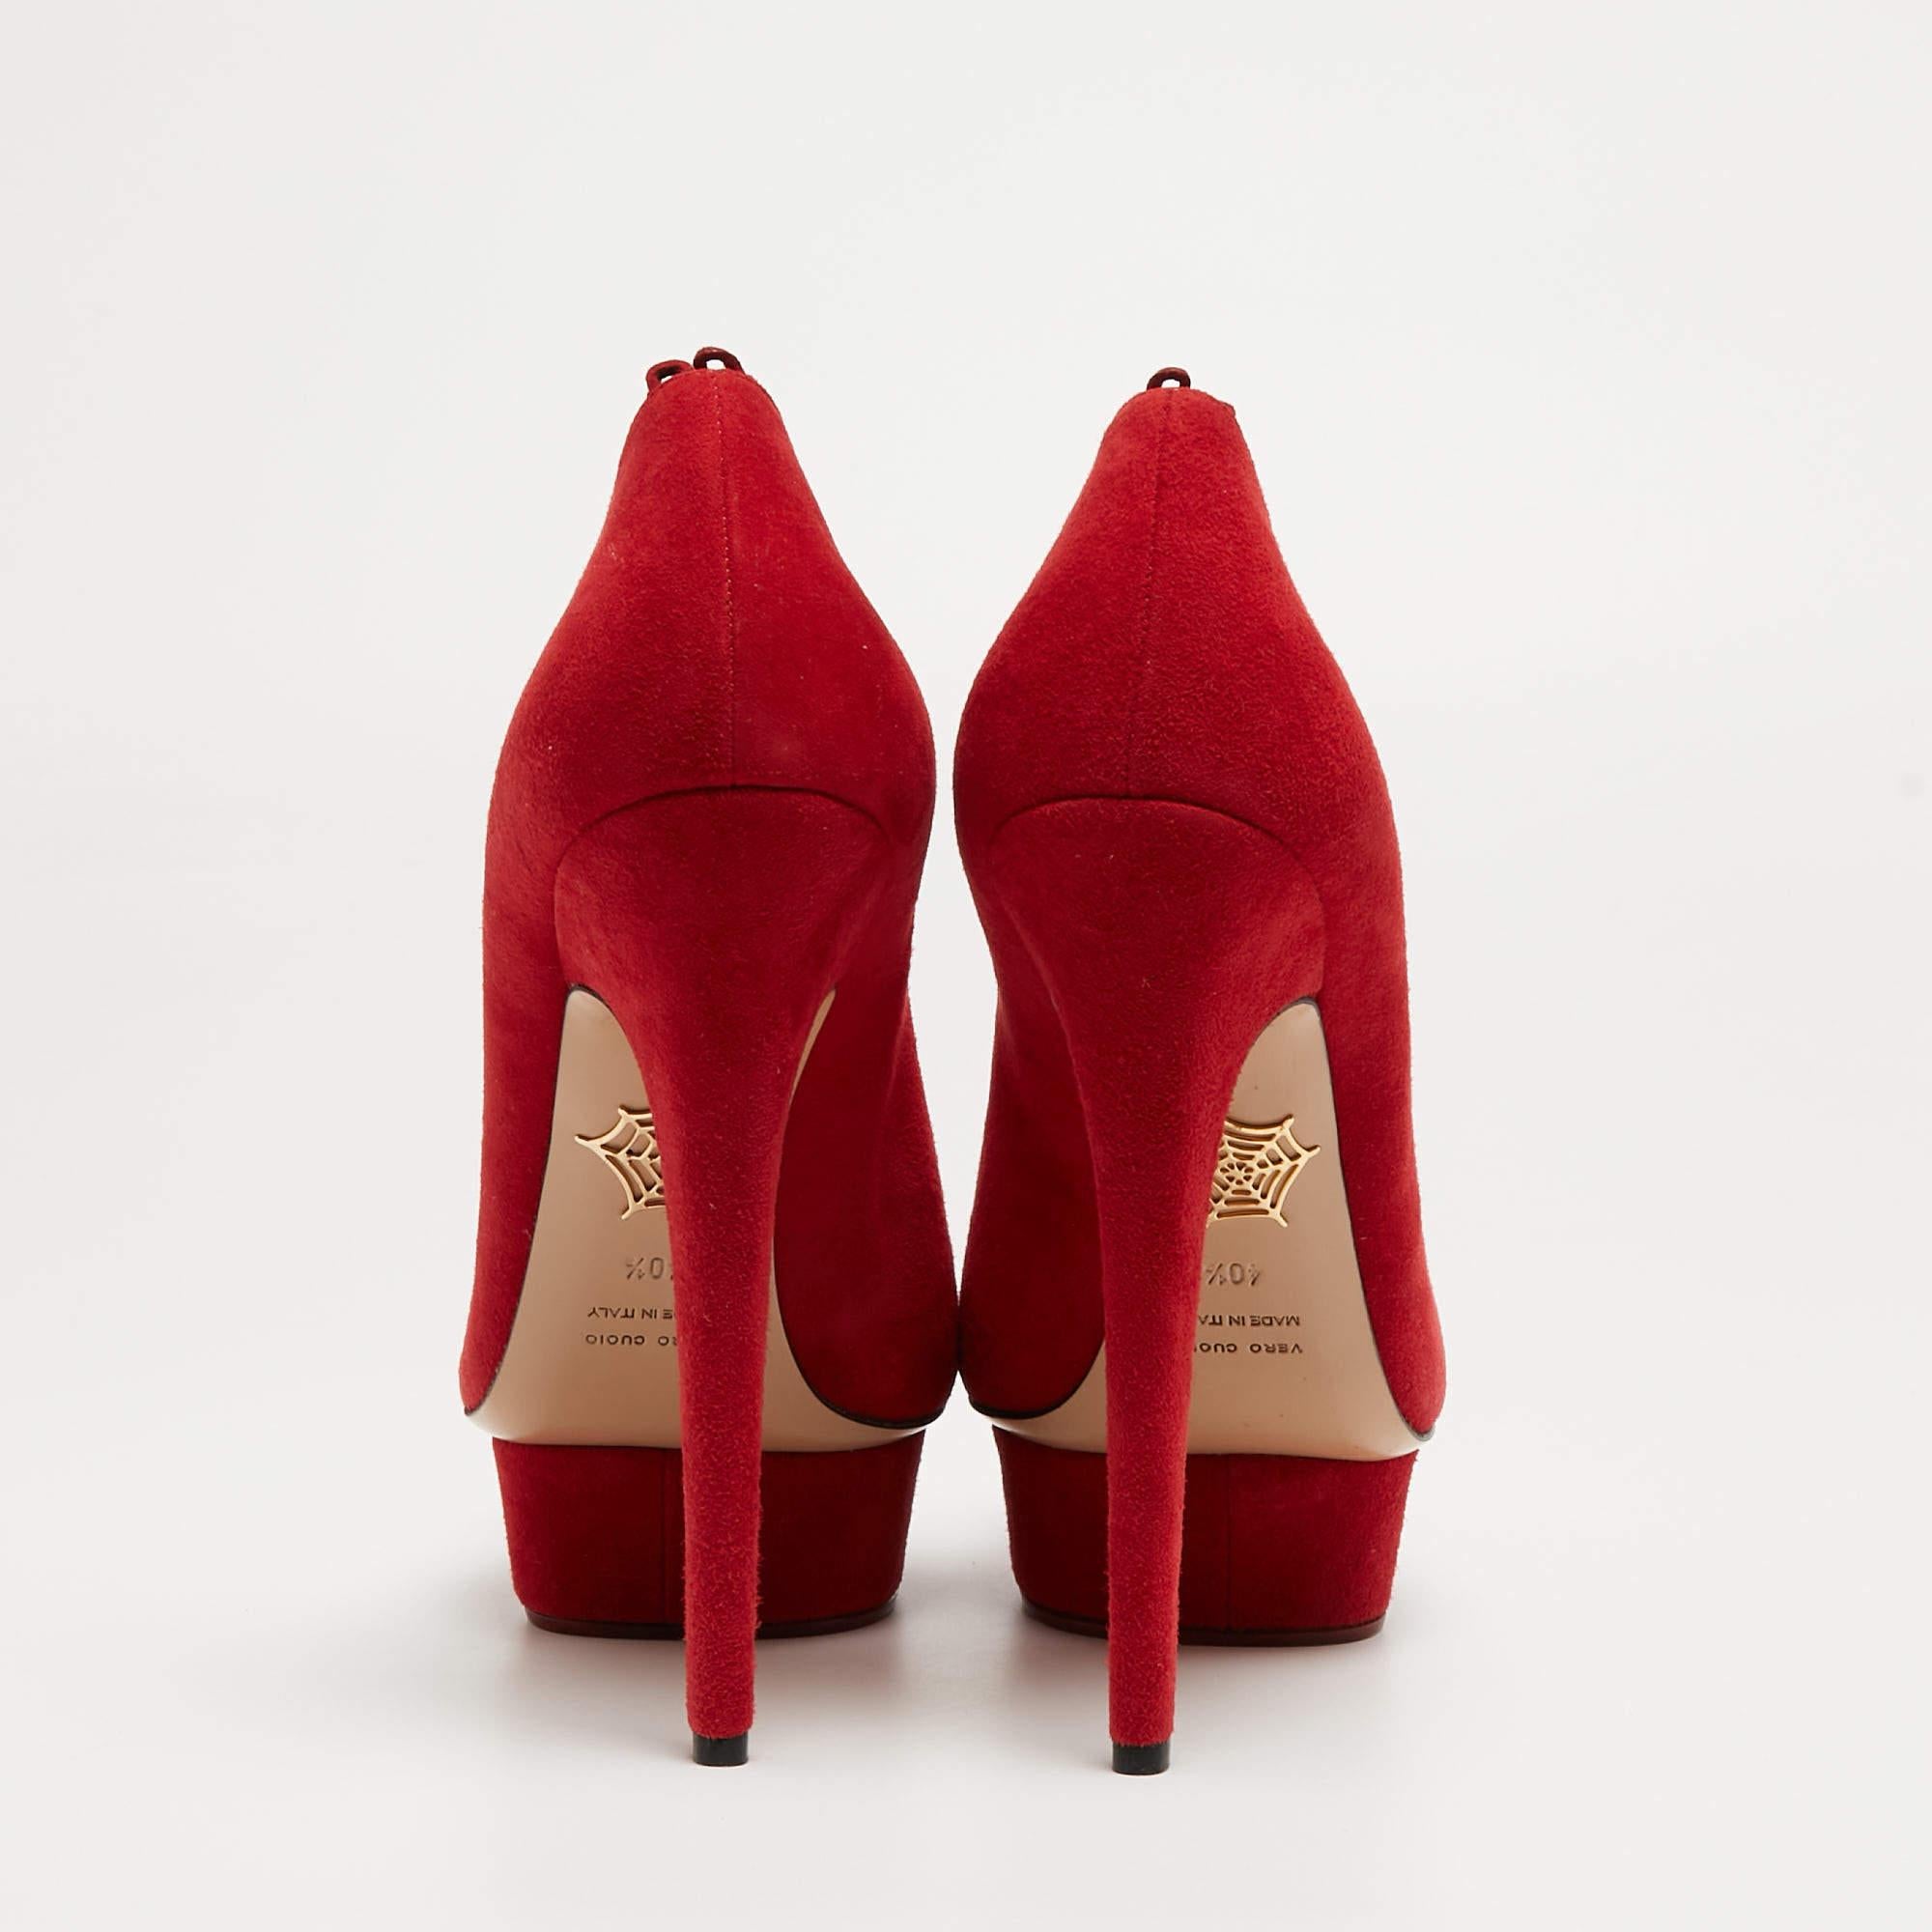 Charlotte Olympia Red Suede Daphne Scalloped Trim Peep ToePumps Size 40.5 For Sale 2